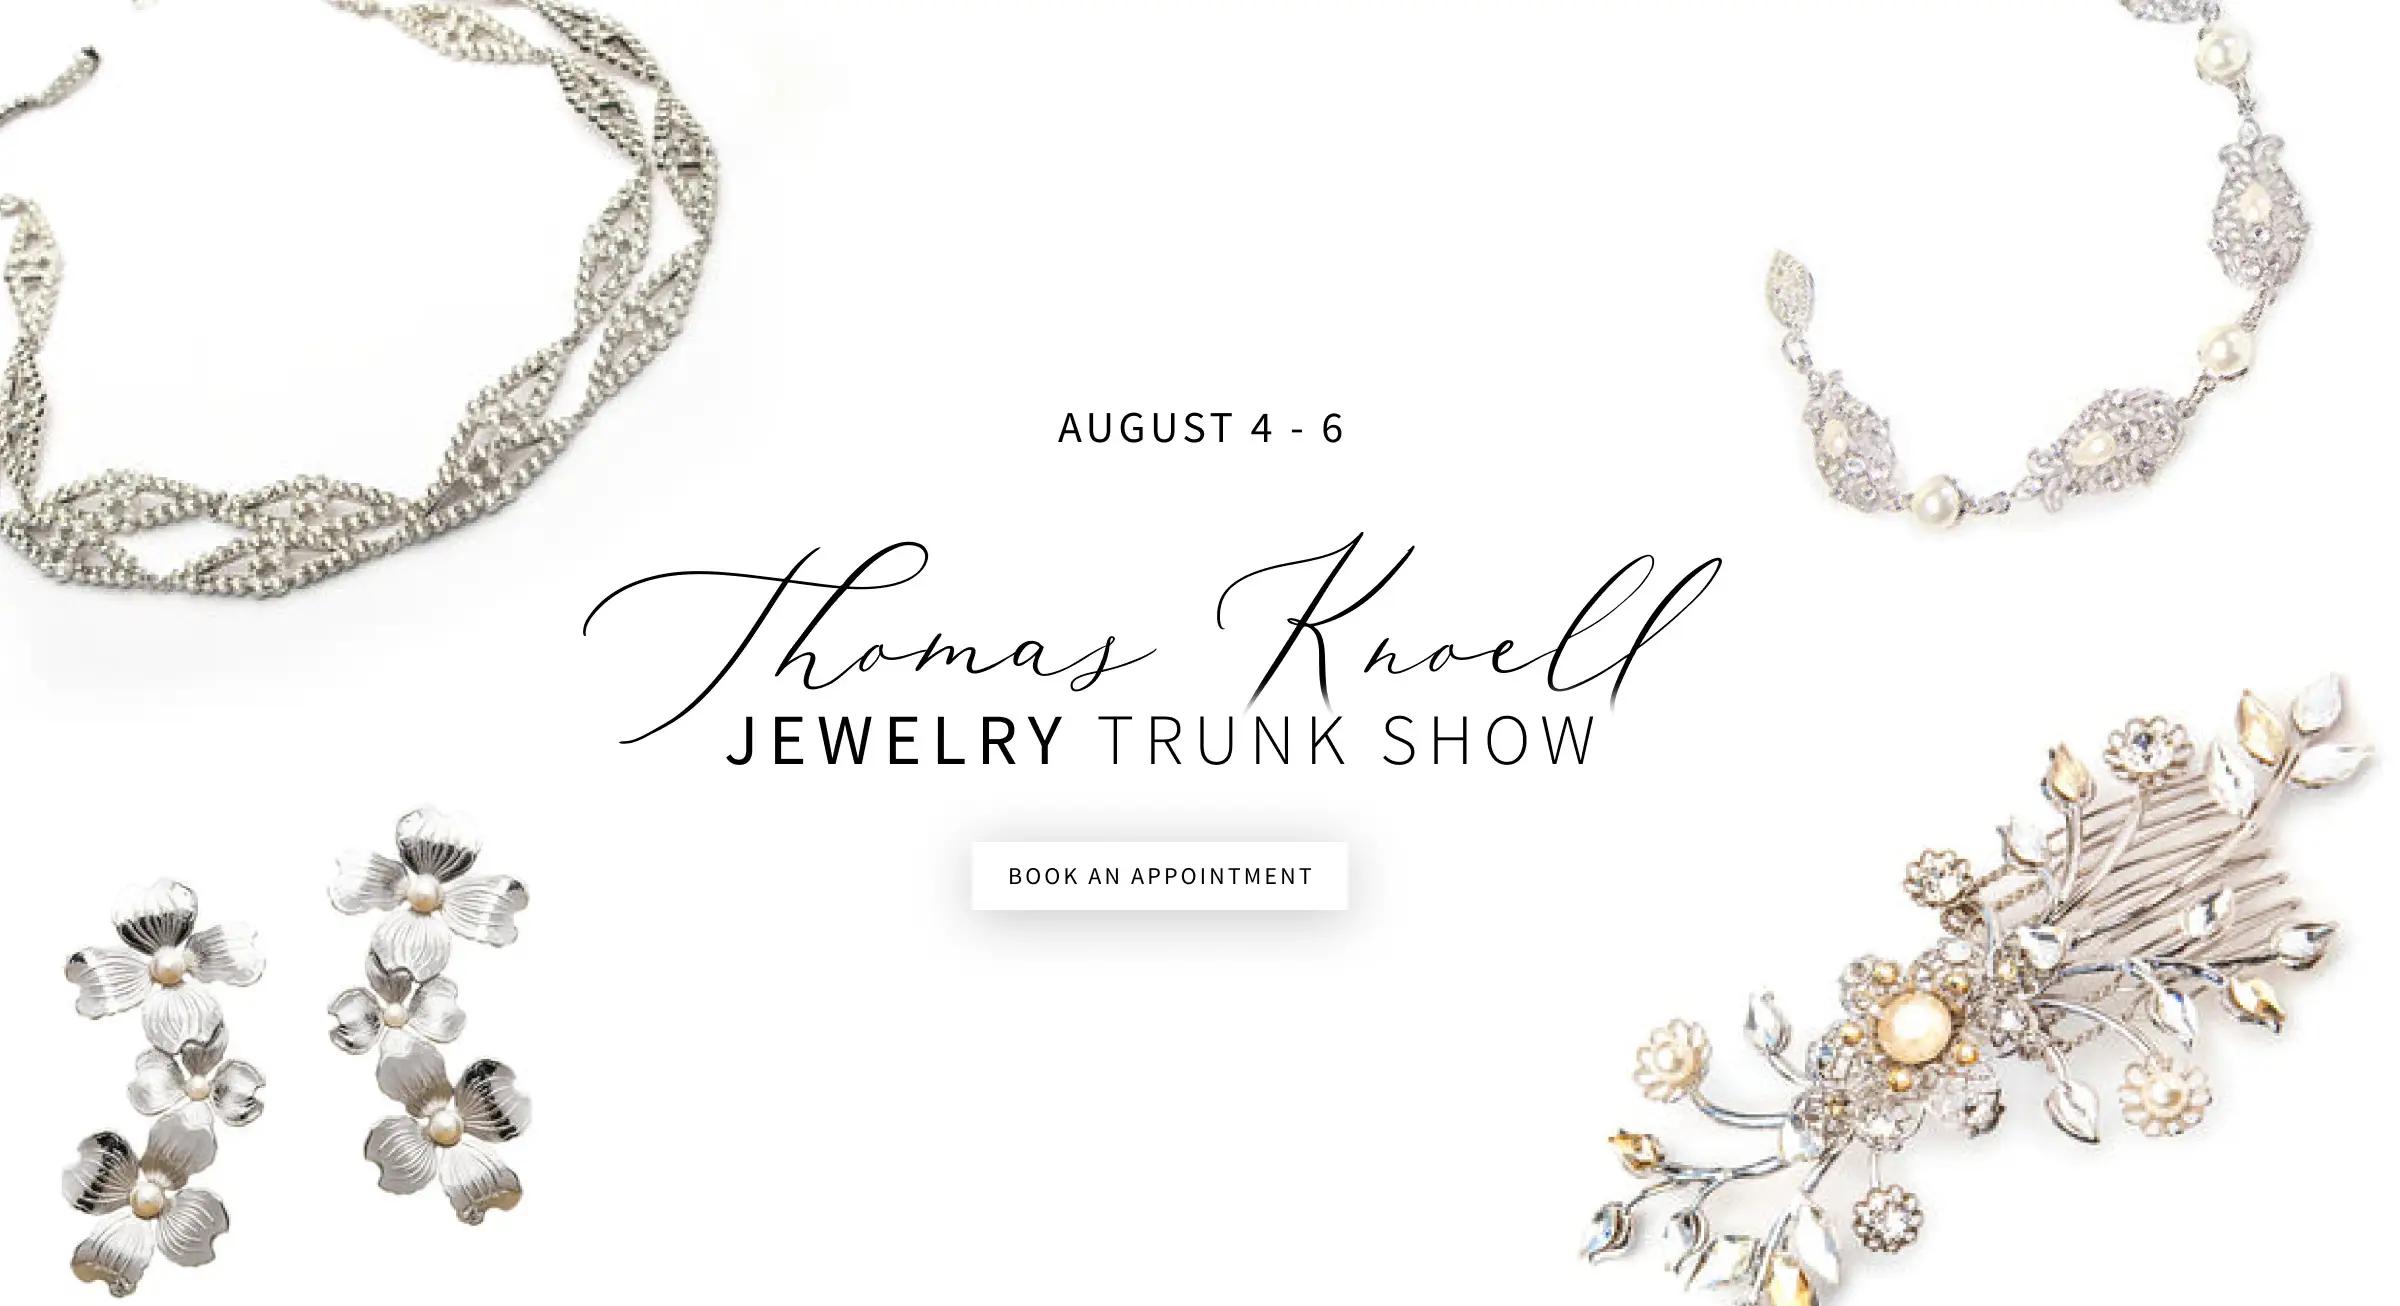 Thomas Knoell Jewelry Trunk Show August 4-6 banner for desktop